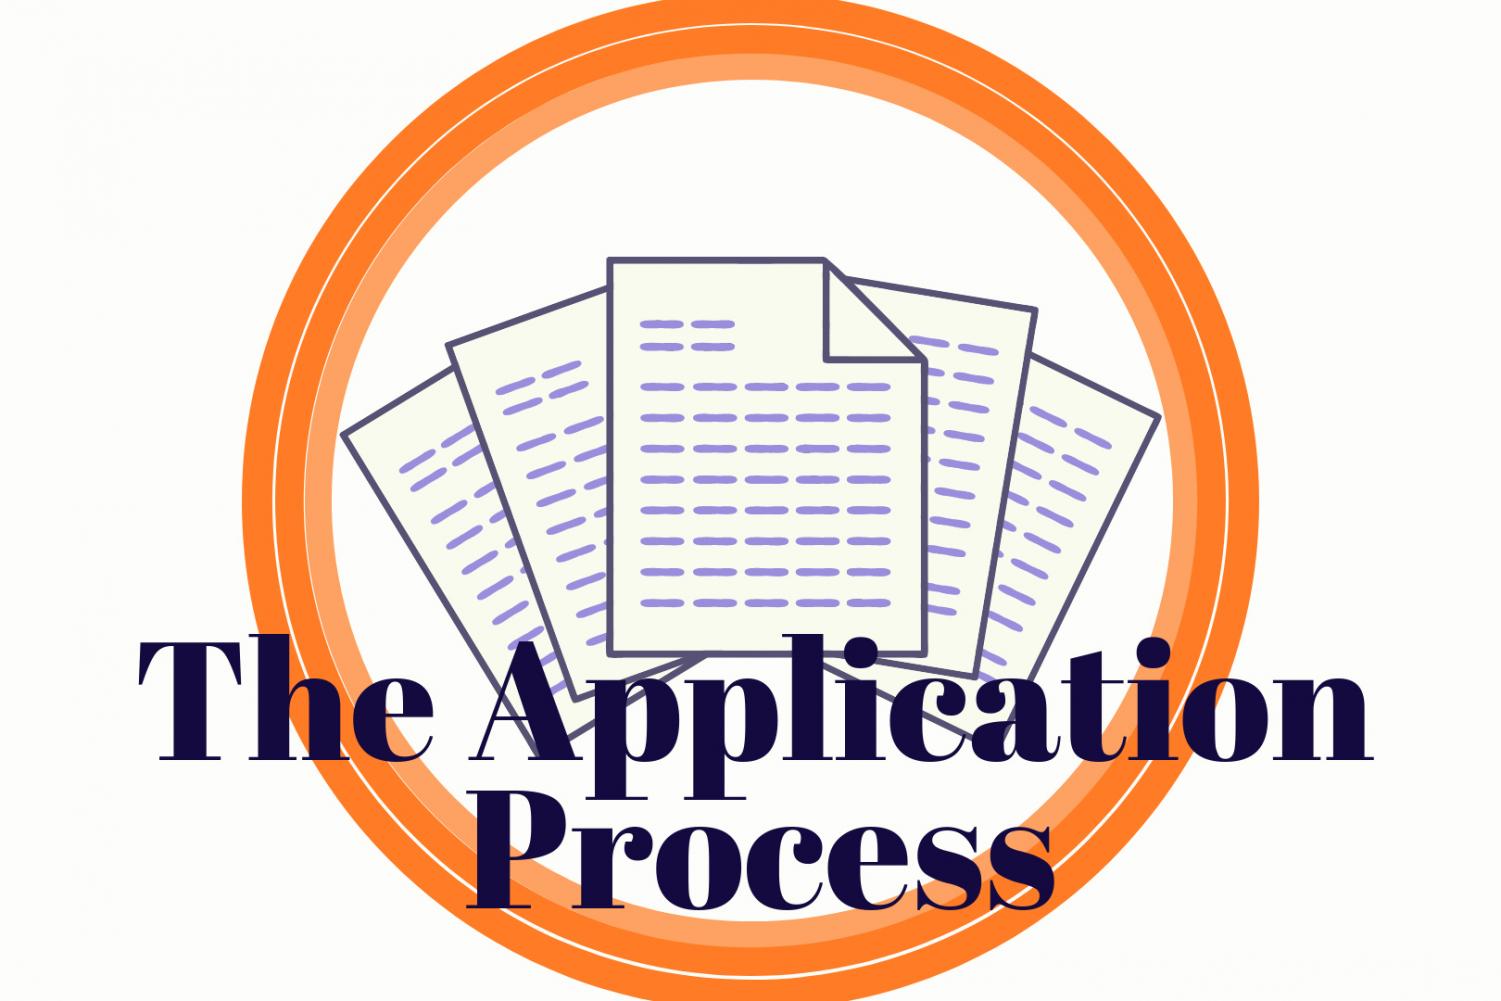 The application process